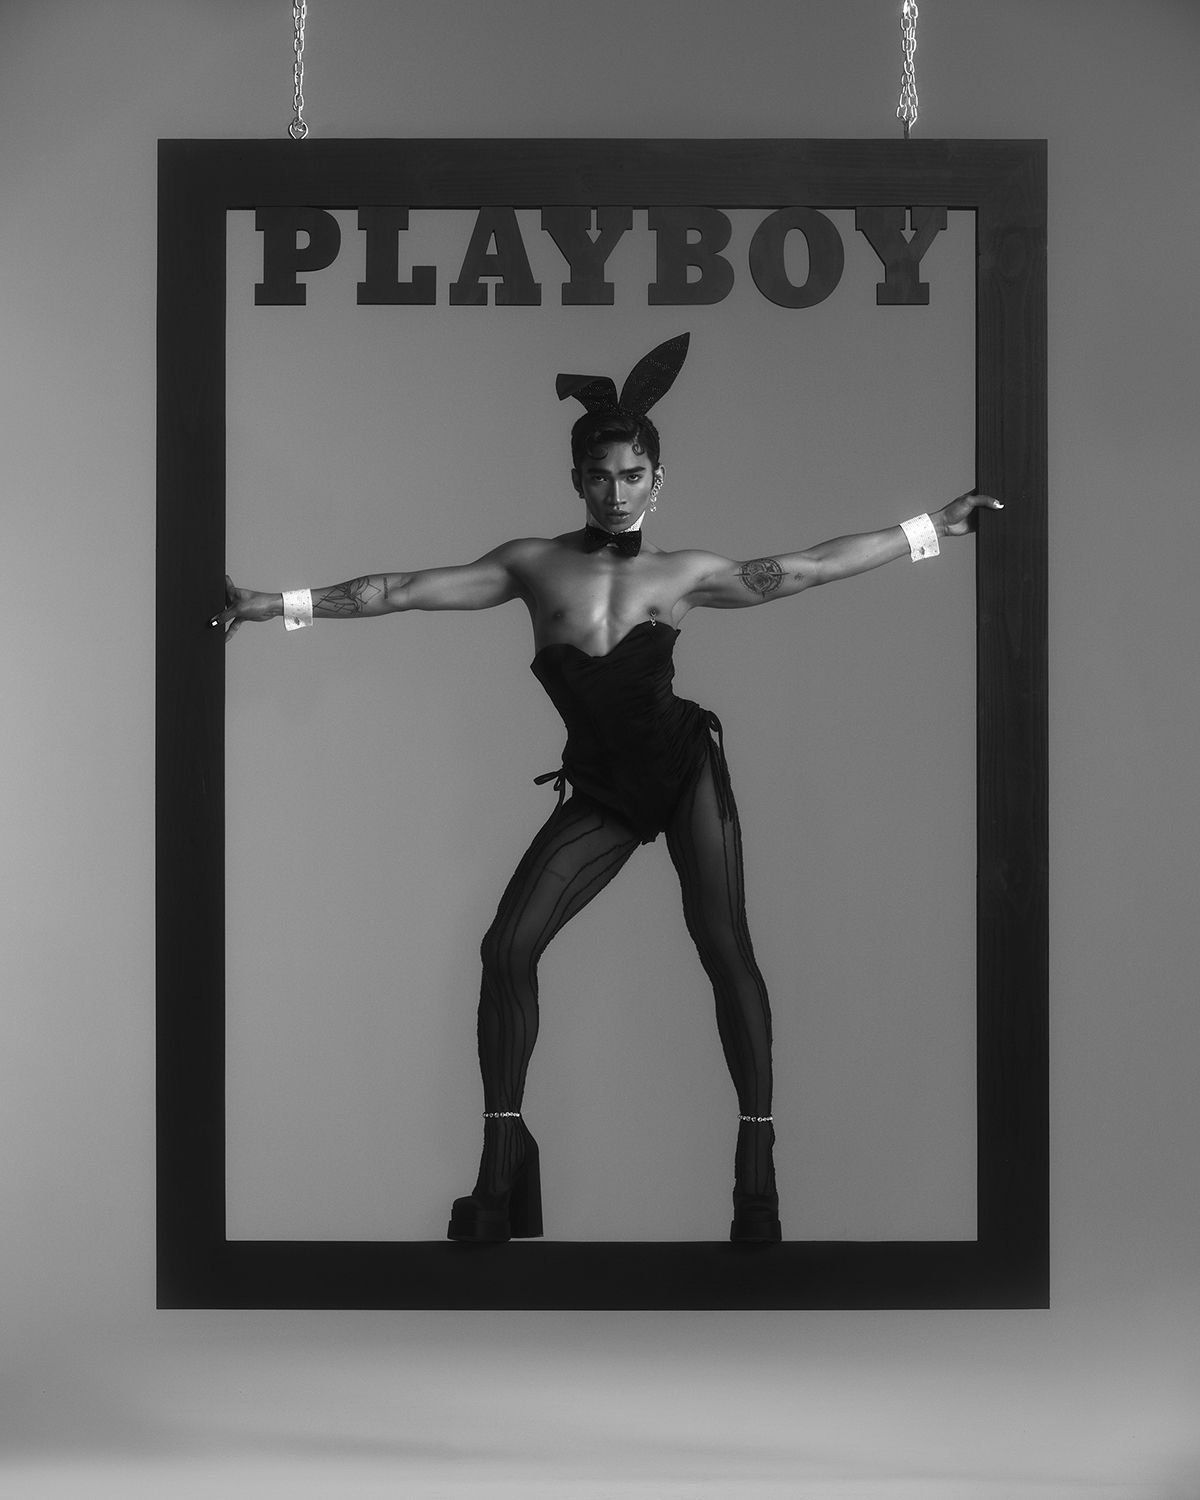 The Man Playboy Show amour videos